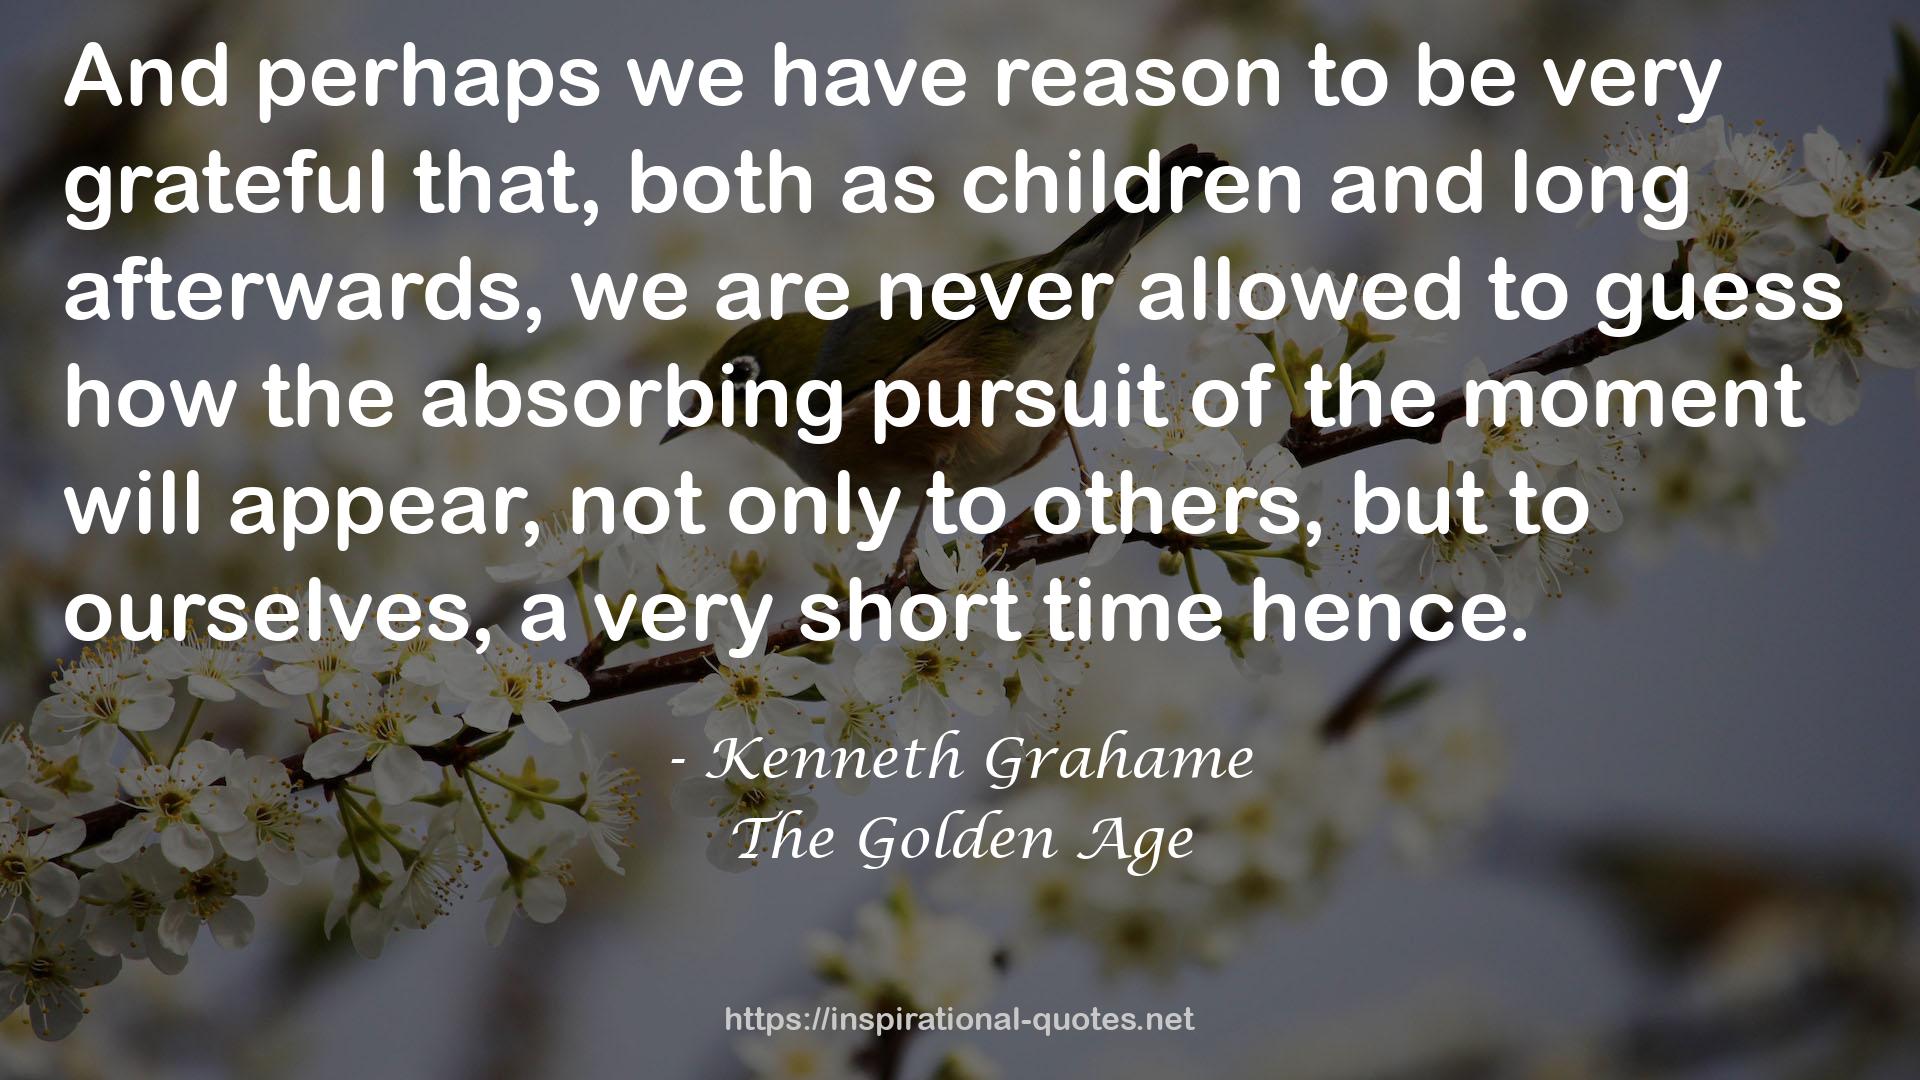 The Golden Age QUOTES